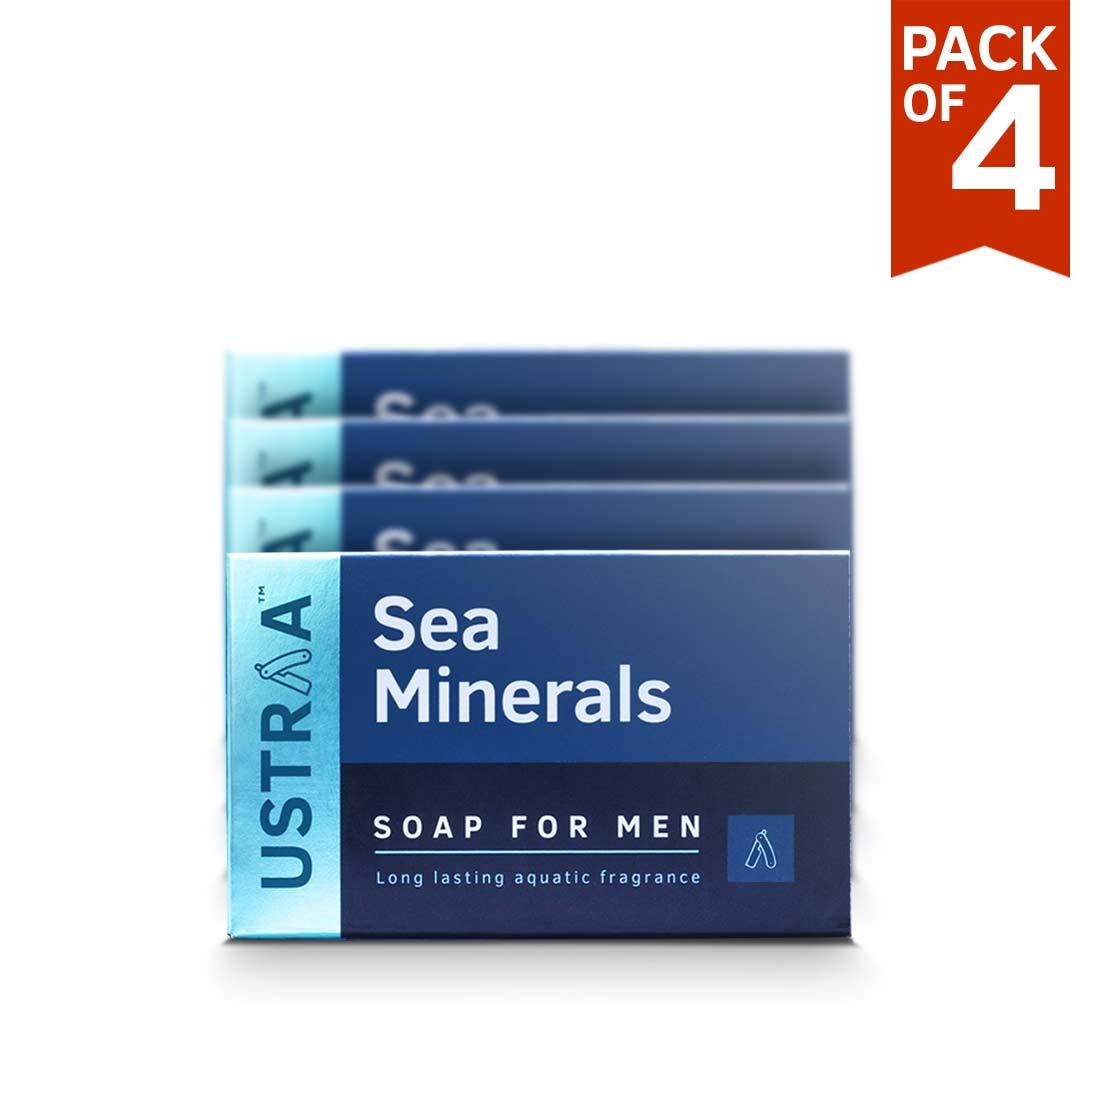 Best Deodorising Soap For Men - With Sea Minerals - Cleansing & Moisturisation with Aquatic Fragrance